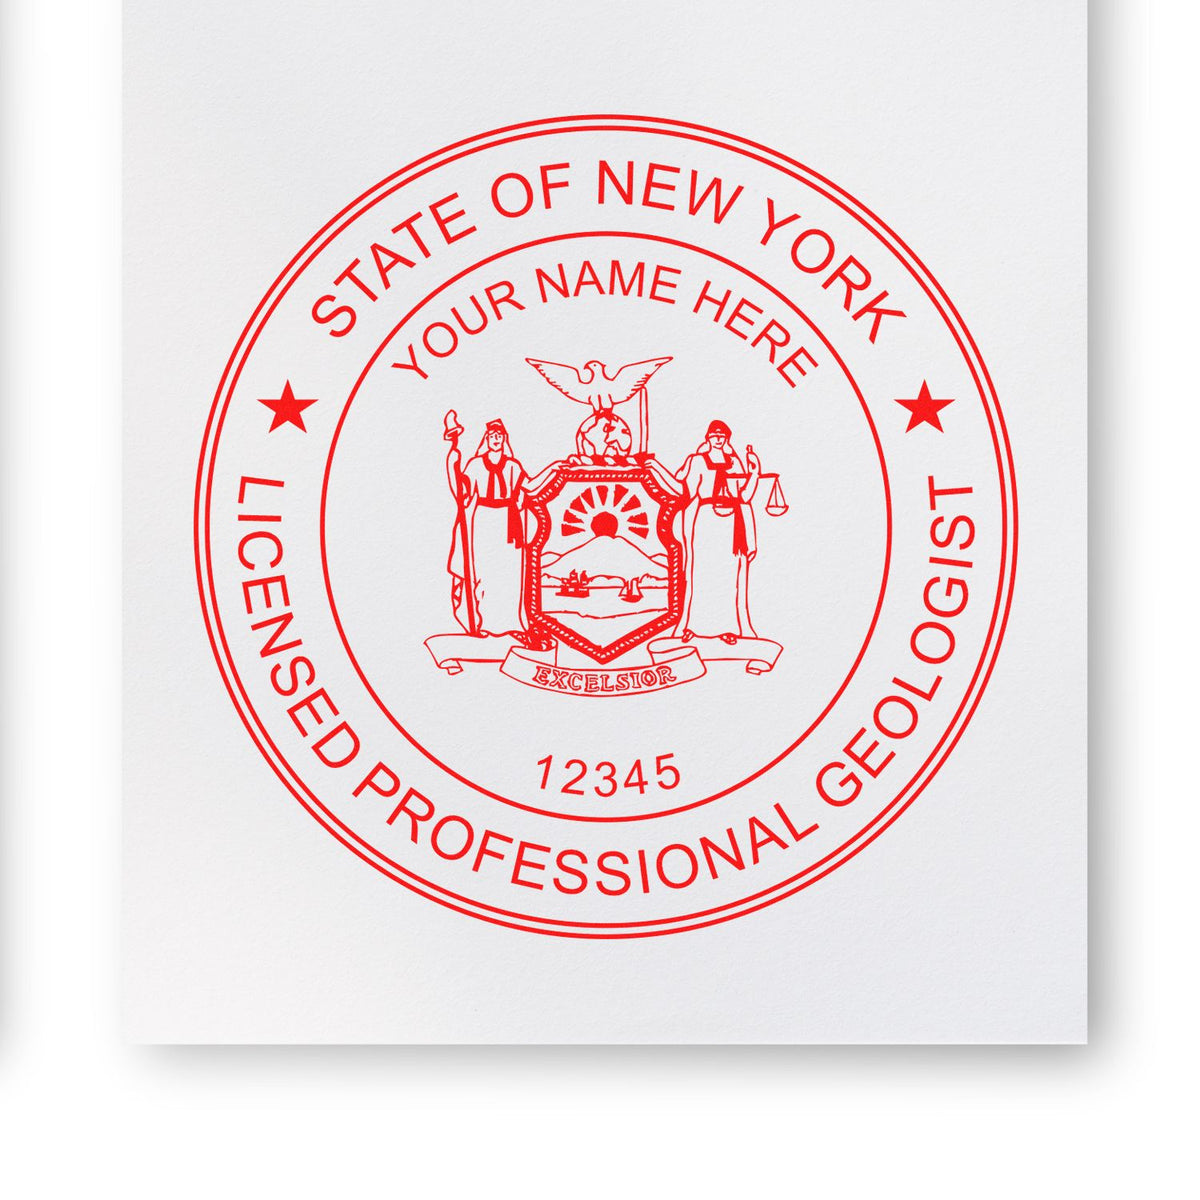 An in use photo of the New York Professional Geologist Seal Stamp showing a sample imprint on a cardstock